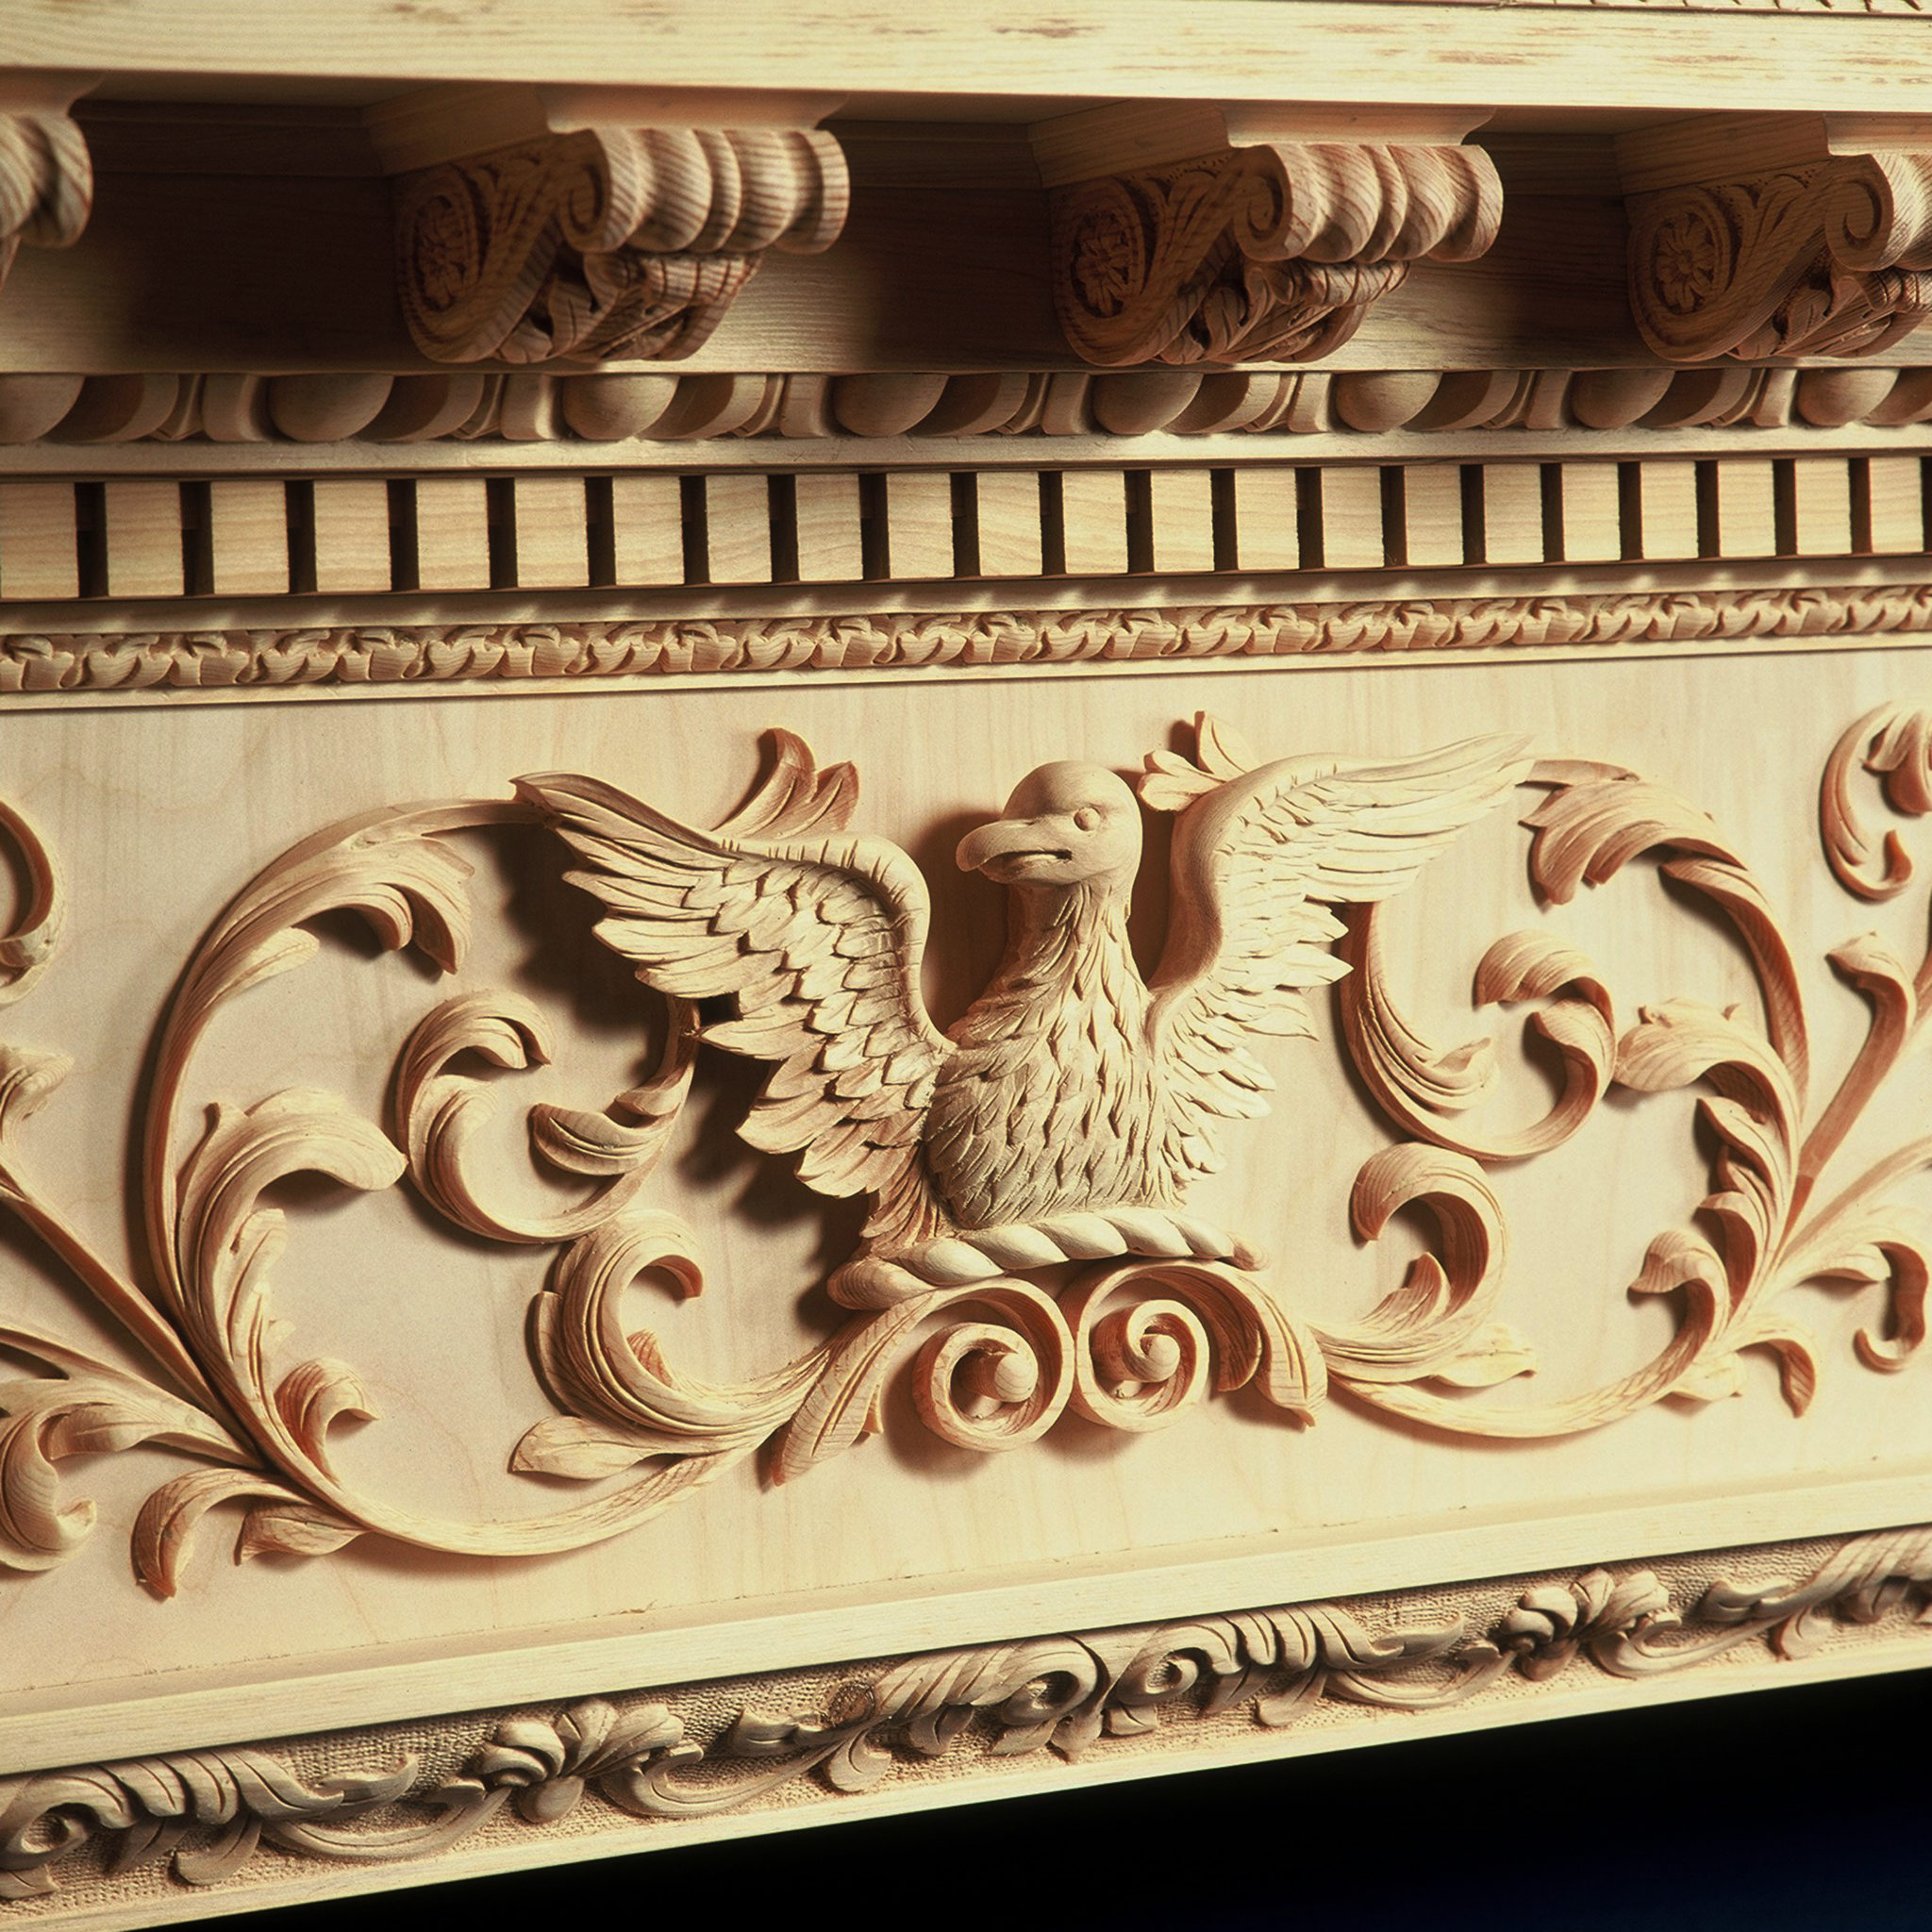 Georgian panelling and carving